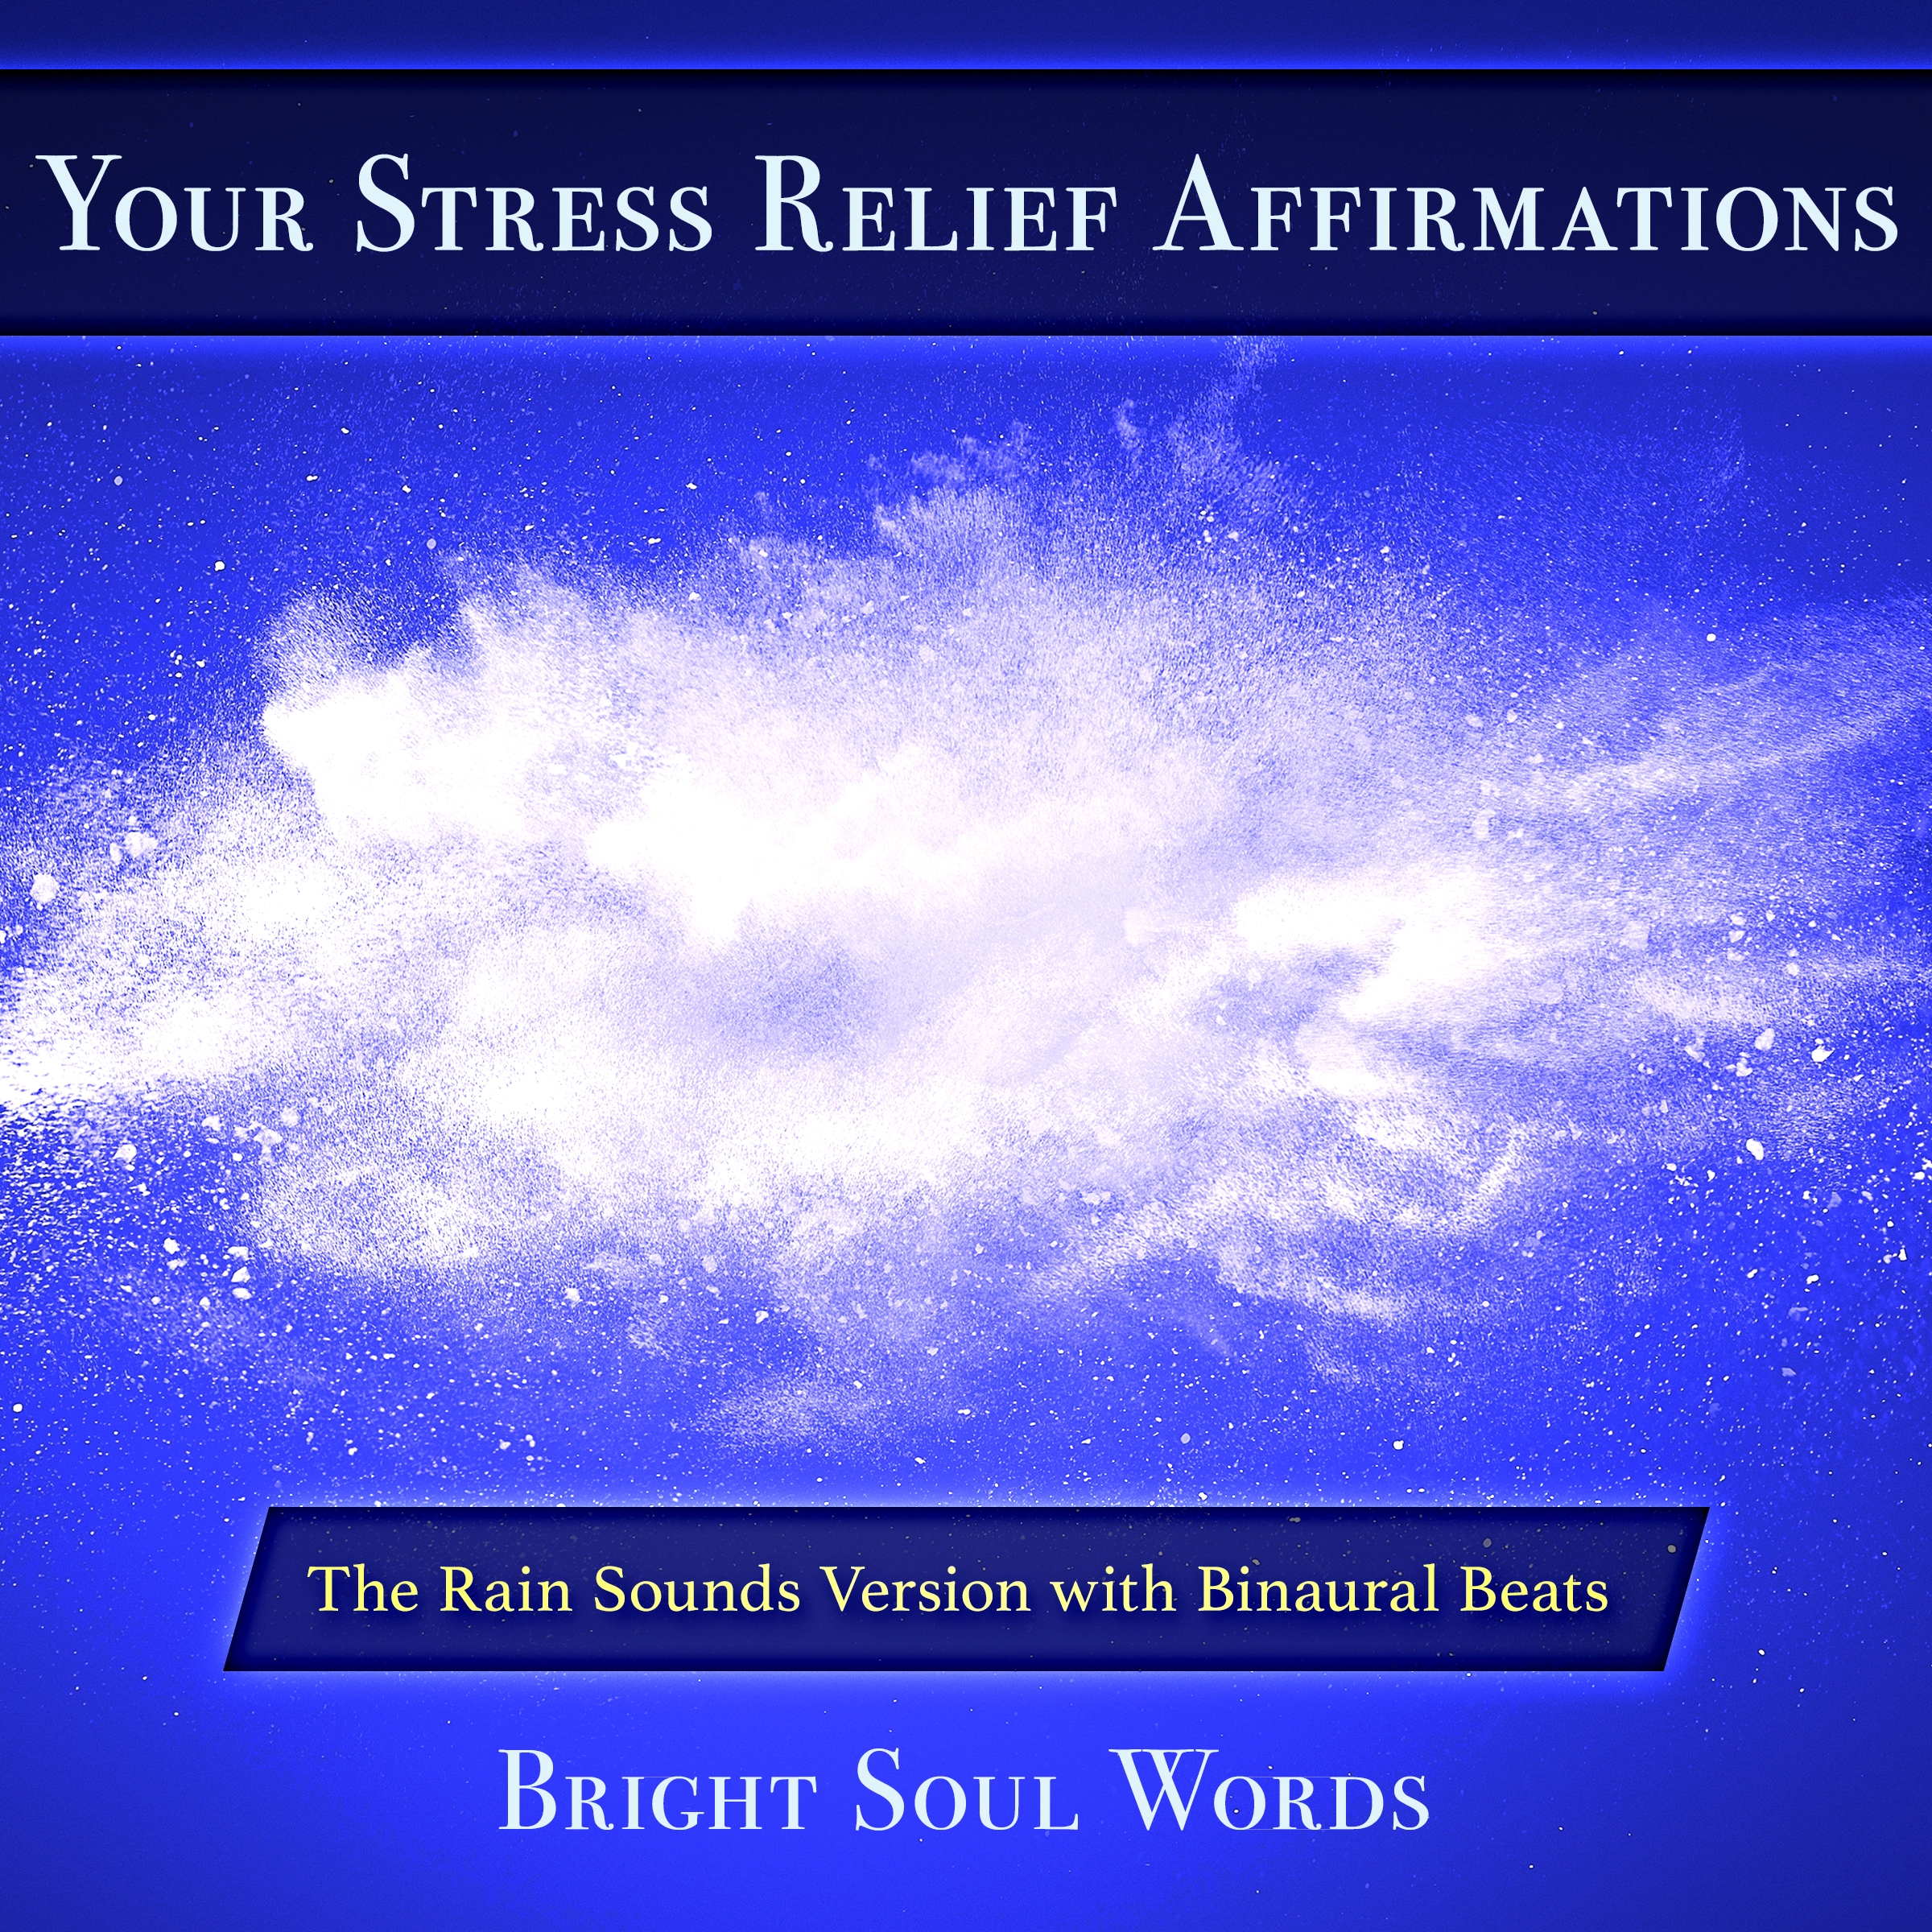 Your Stress Relief Affirmations: The Rain Sounds Version with Binaural Beats Audiobook by Bright Soul Words